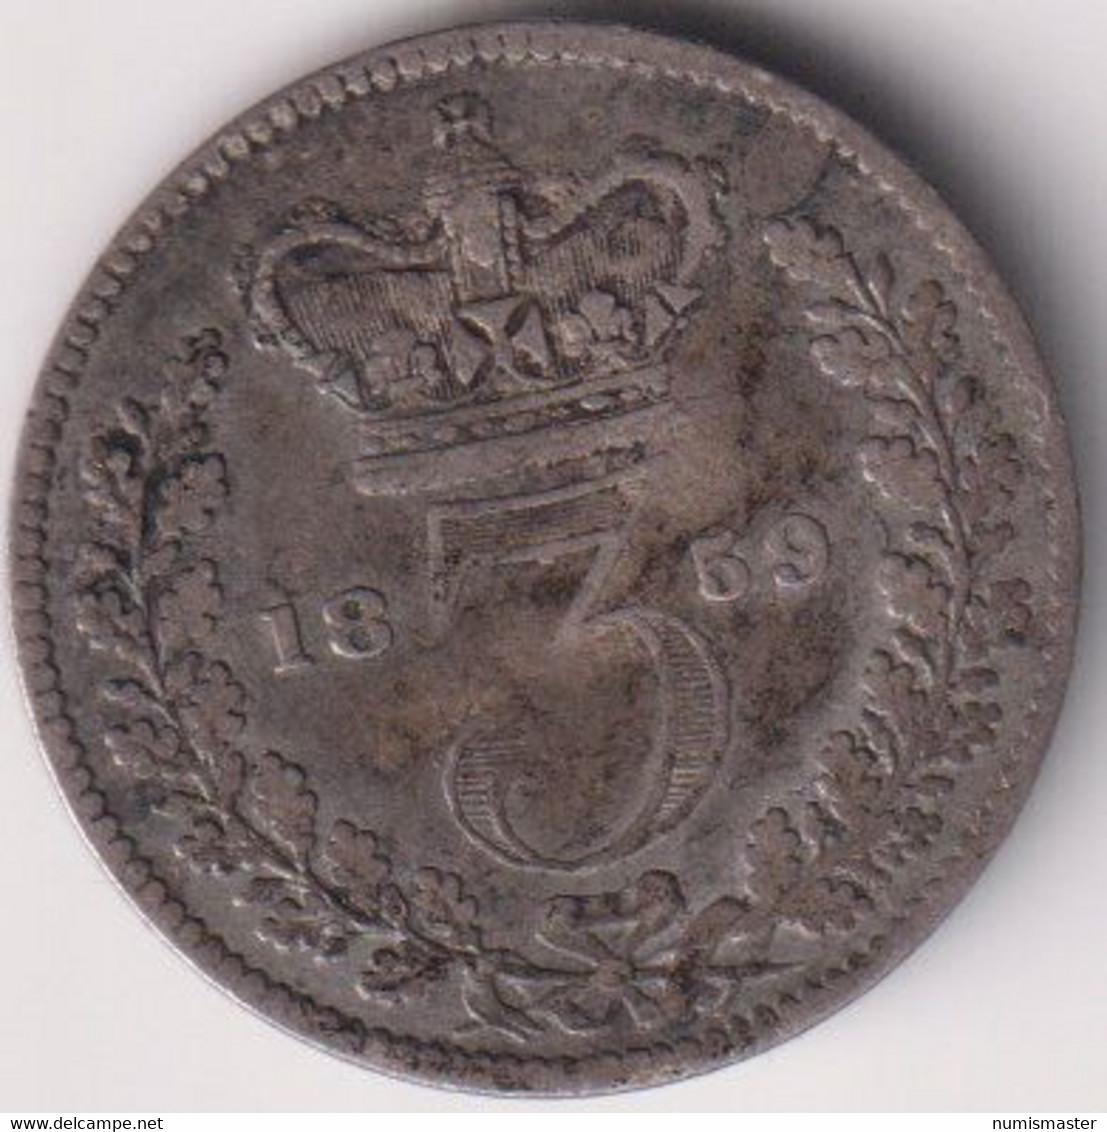 GREAT BRITAIN , 3 PENCE 1859 - F. 3 Pence